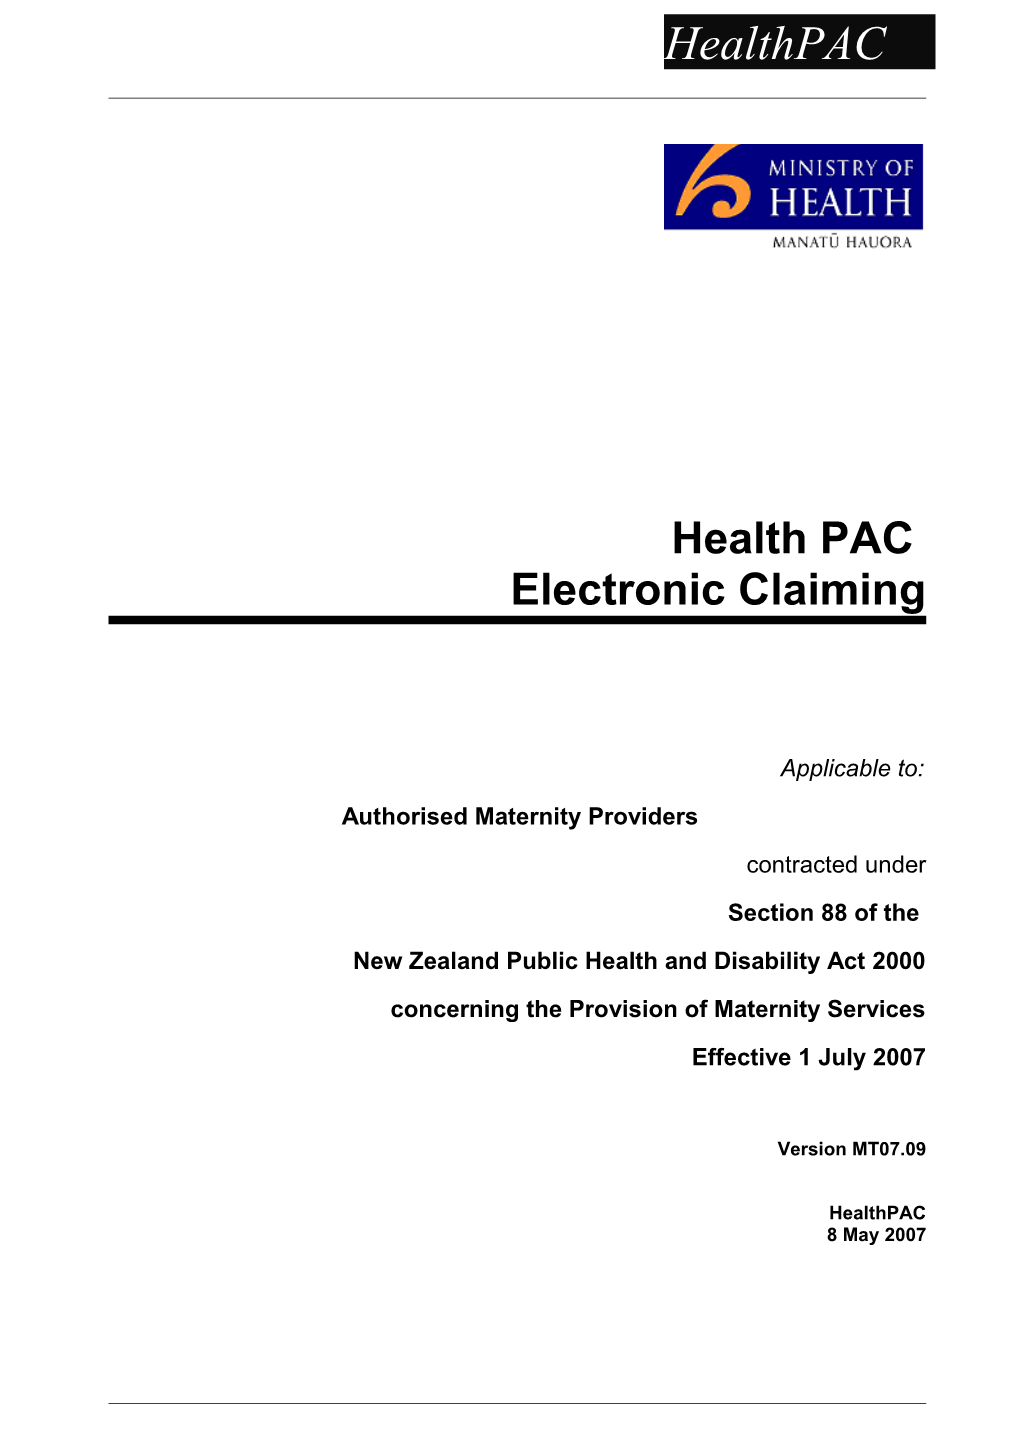 Health PAC Electronic Claiming